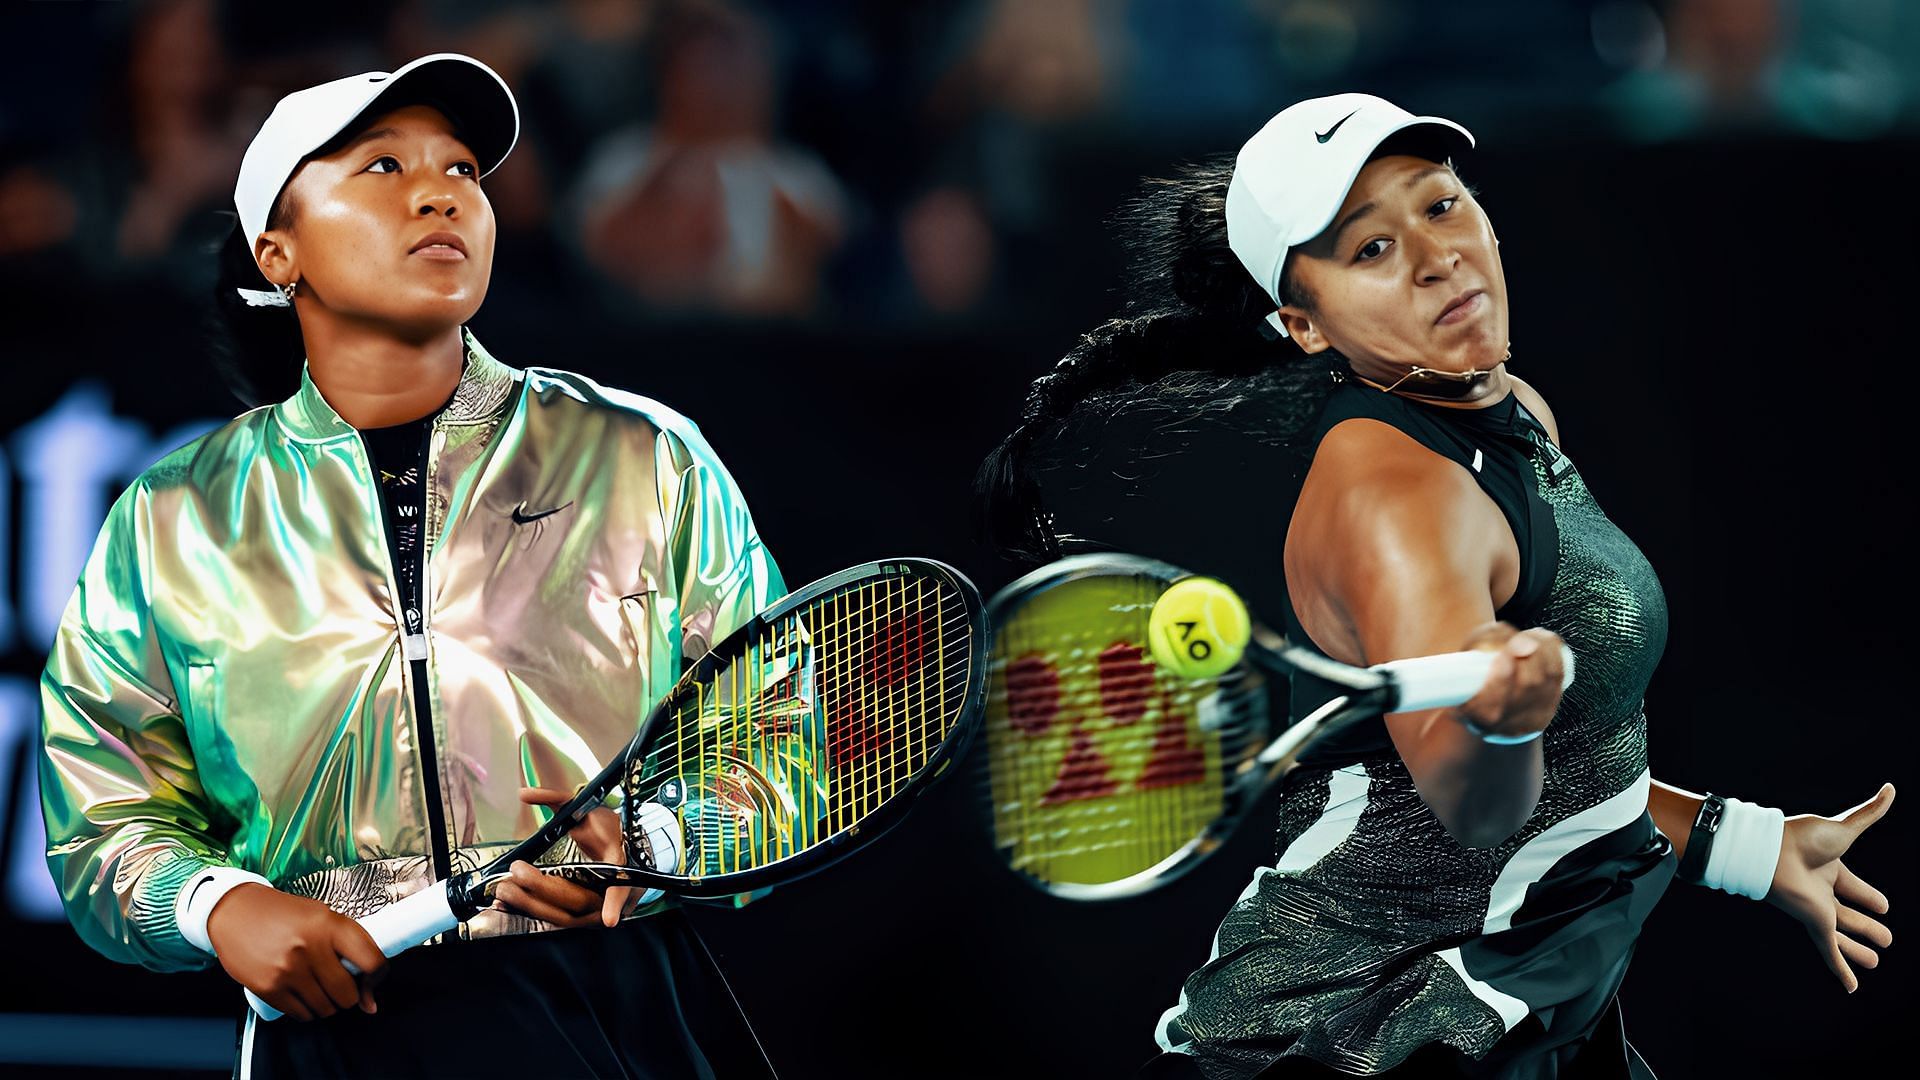 Naomi Osaka discusses her outfit details at the Abu Dhabi Open